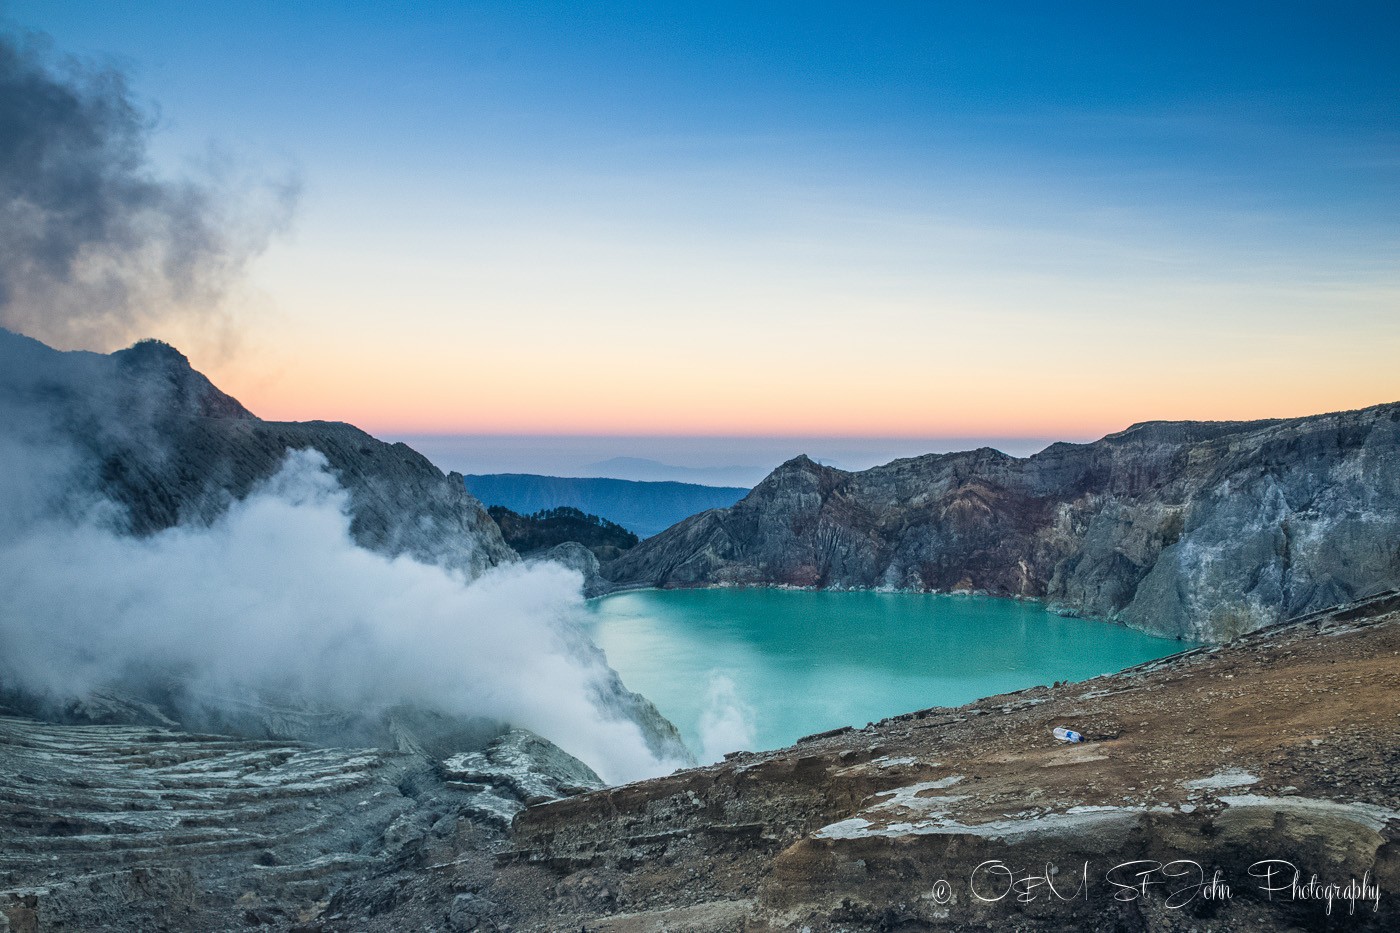 2 Weeks in Indonesia: Turquoise sulfur lake of Ijen Crater. East Java, Indonesia